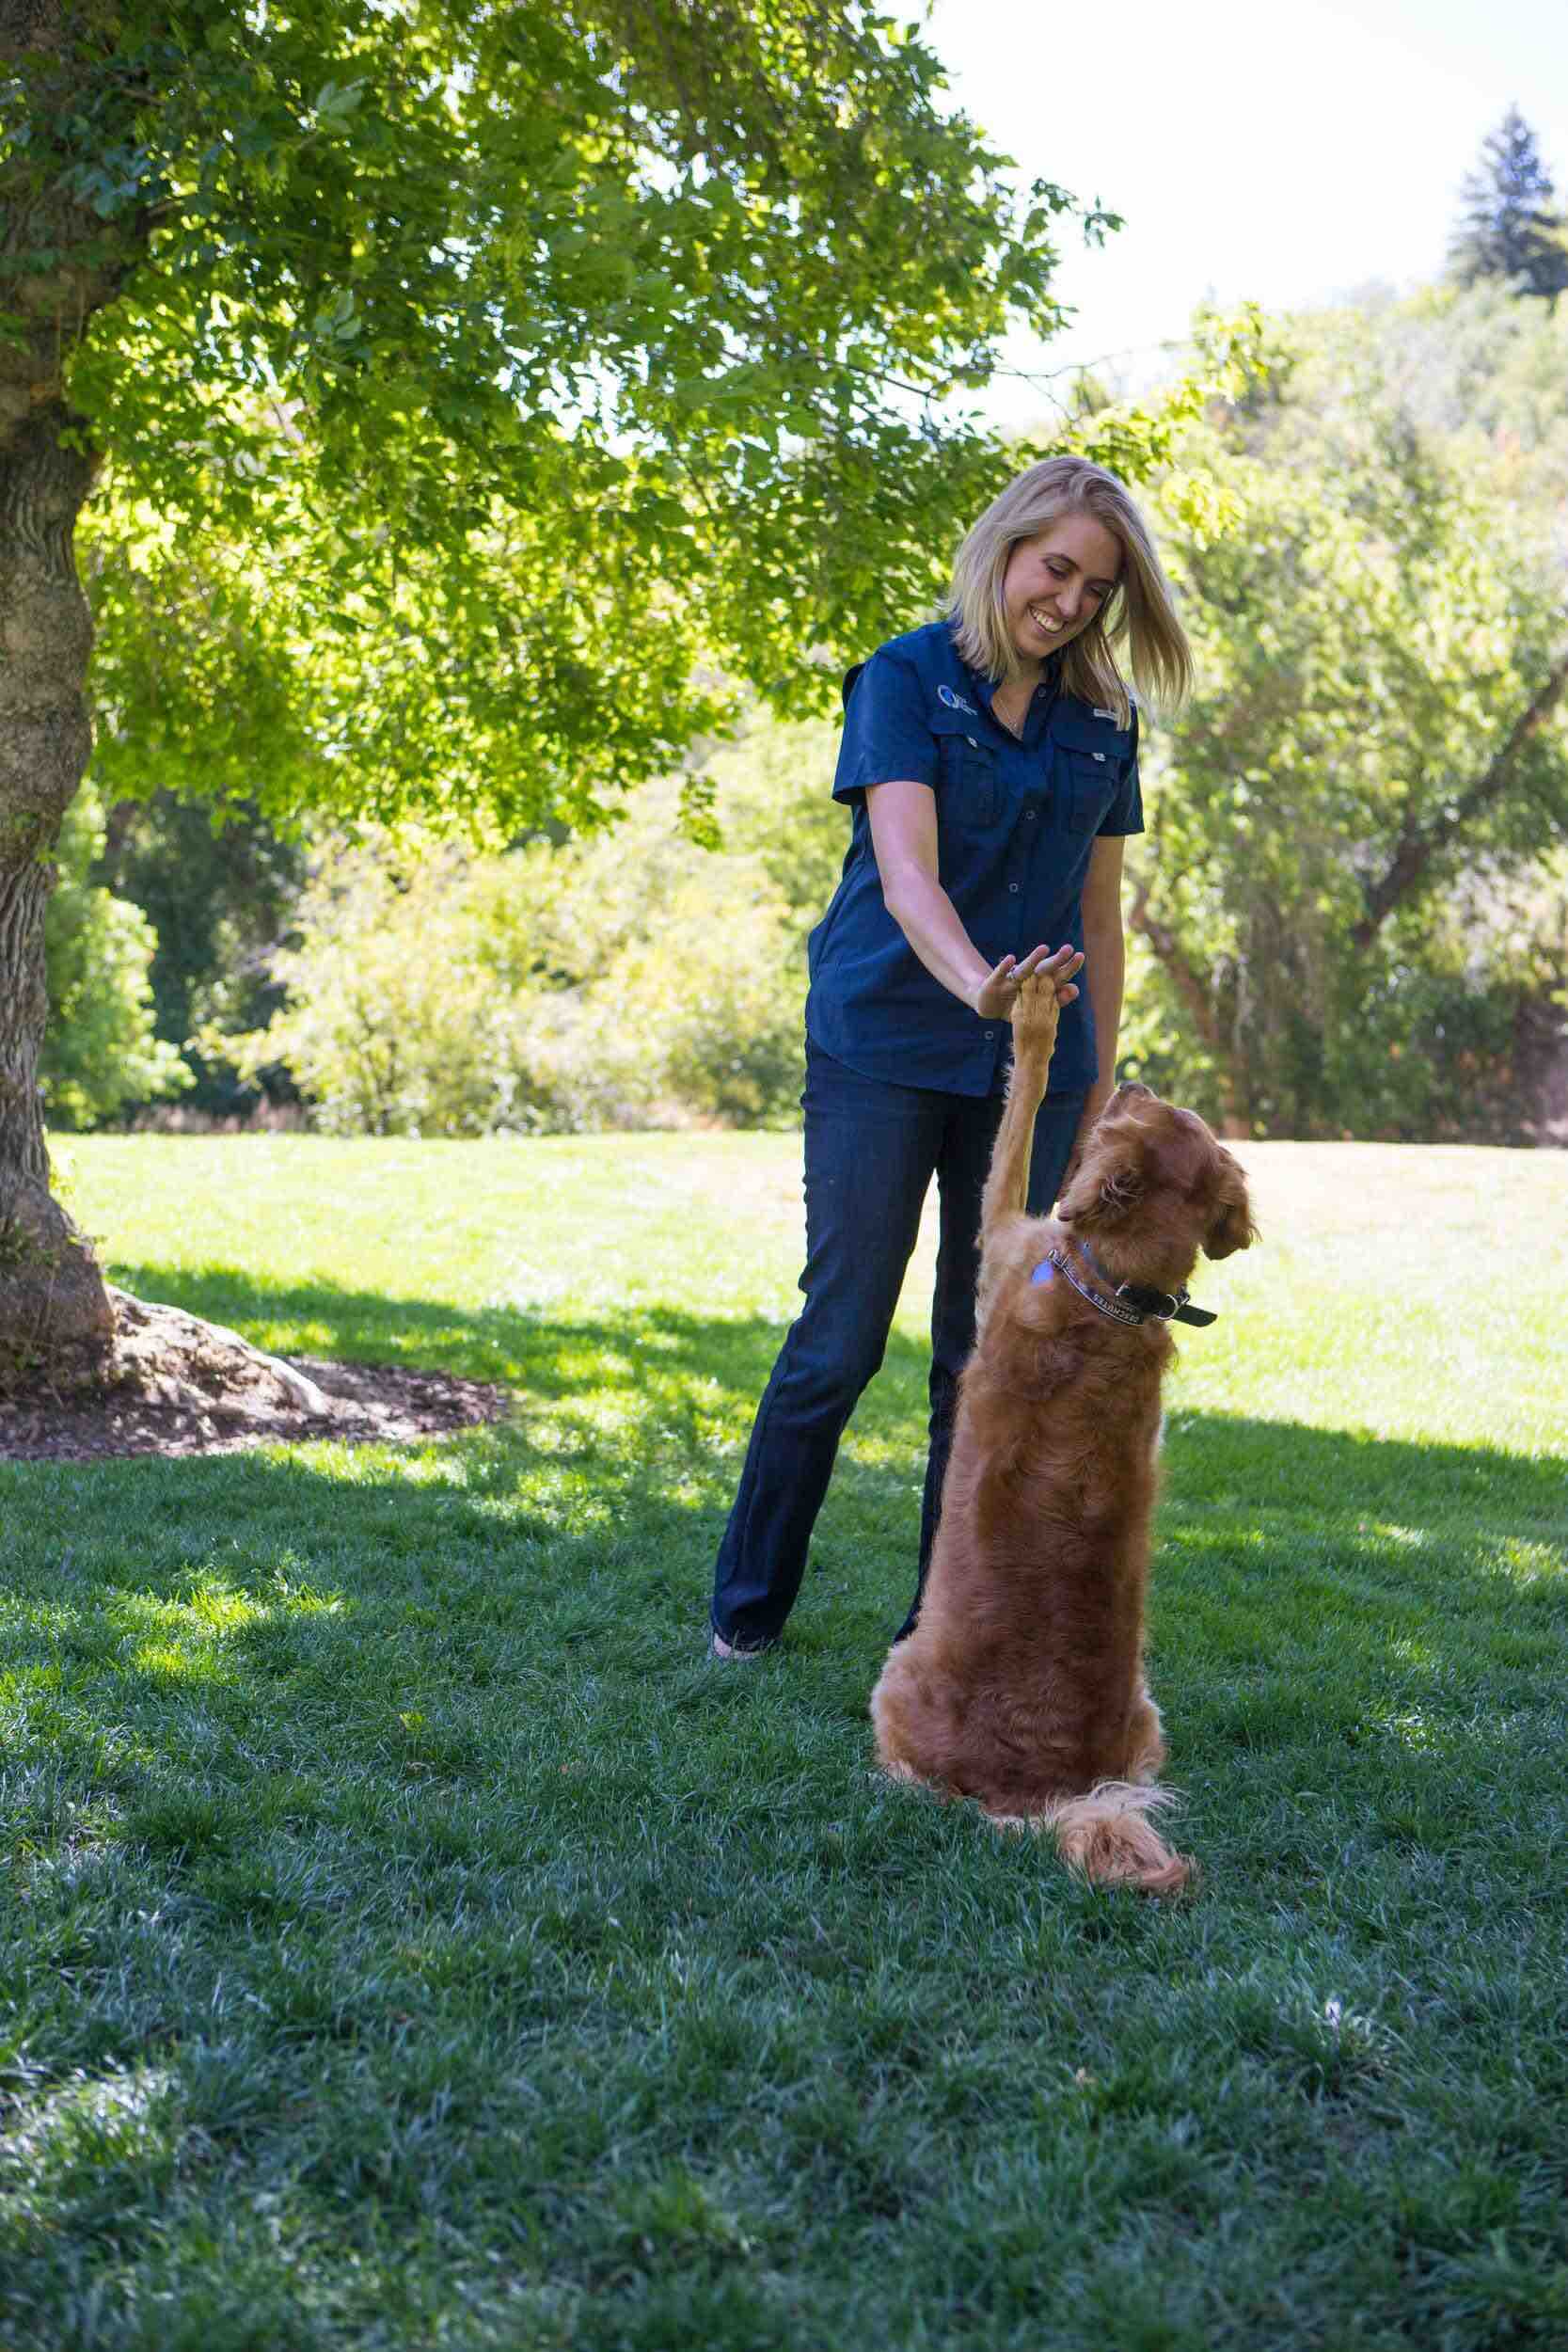 Advantages of starting the easiest franchise with Dog Training Elite.